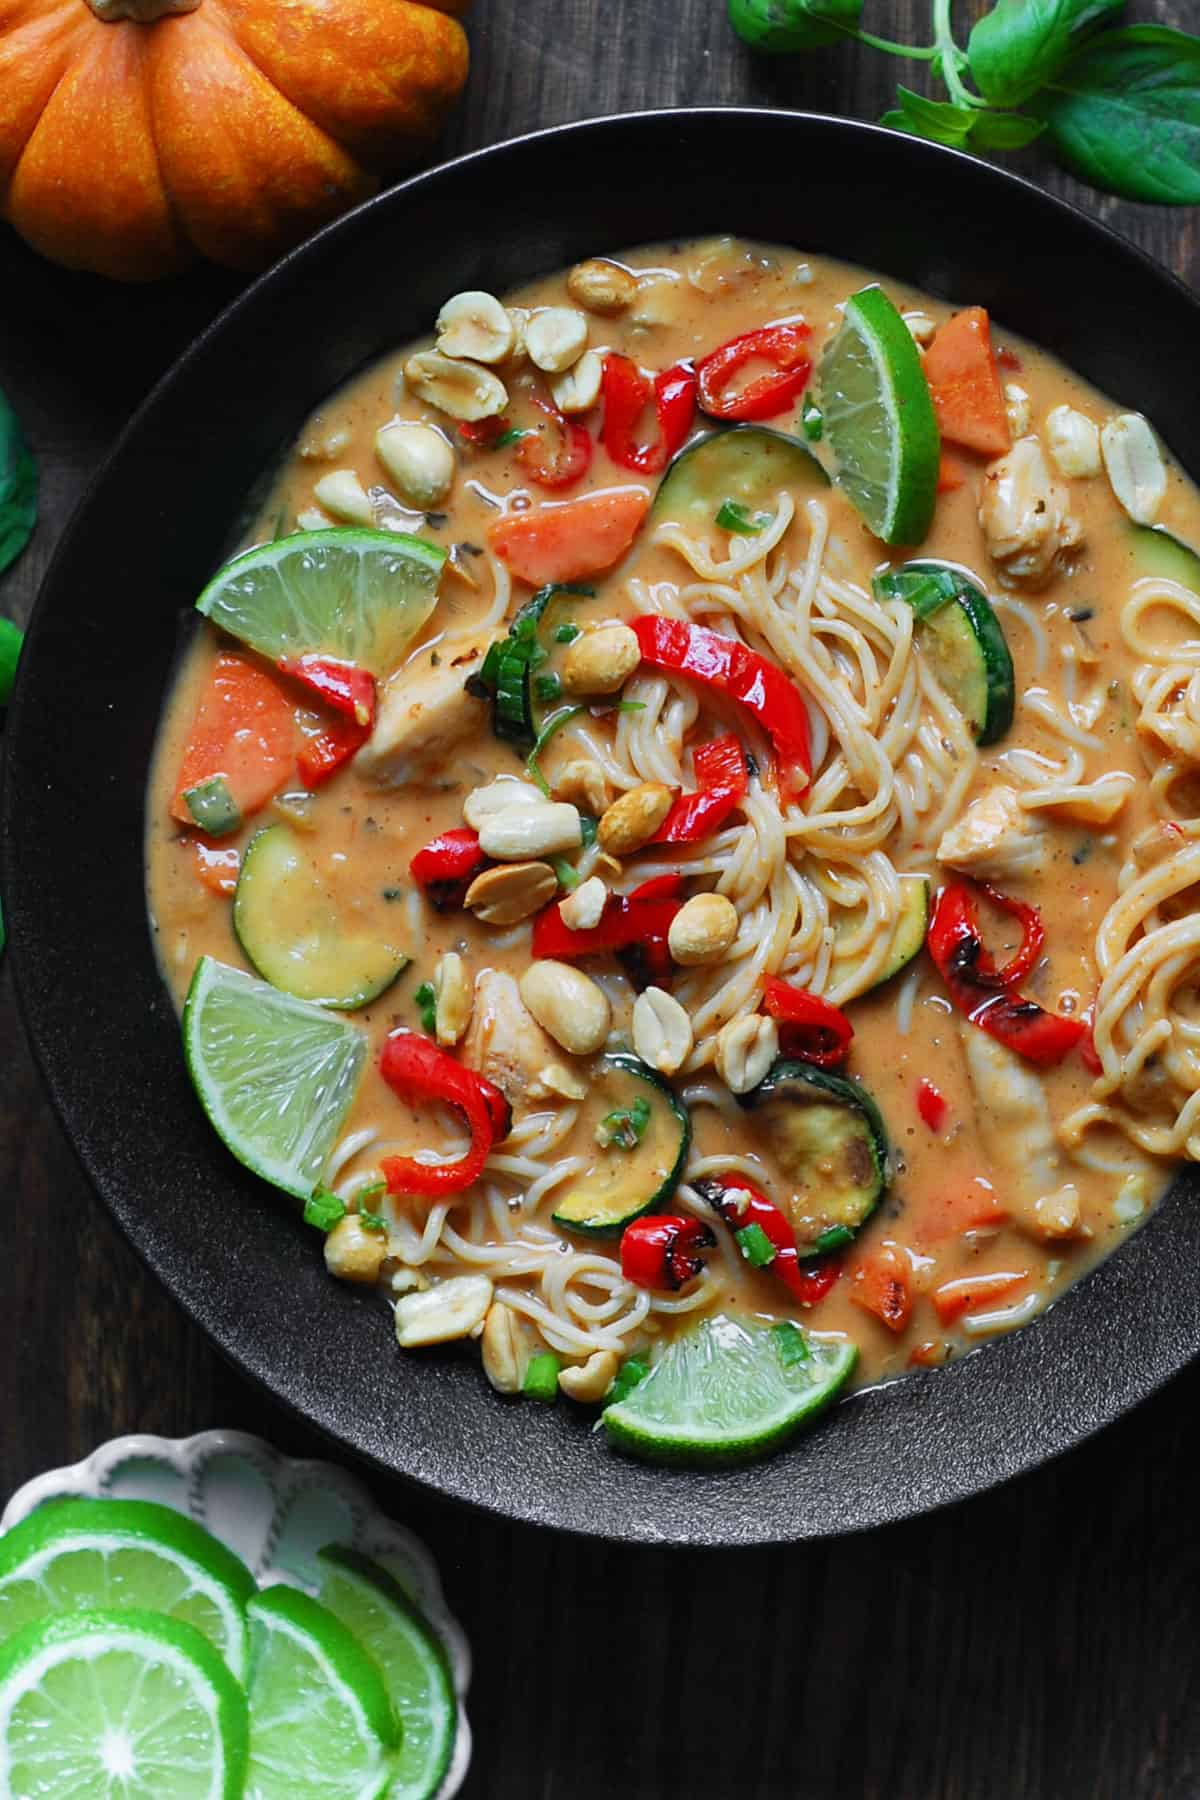 Thai-inspired Red Curry Noodle Soup with chicken, coconut broth, lime juice, red bell peppers, zucchini, carrots, and peanuts - in a black bowl.